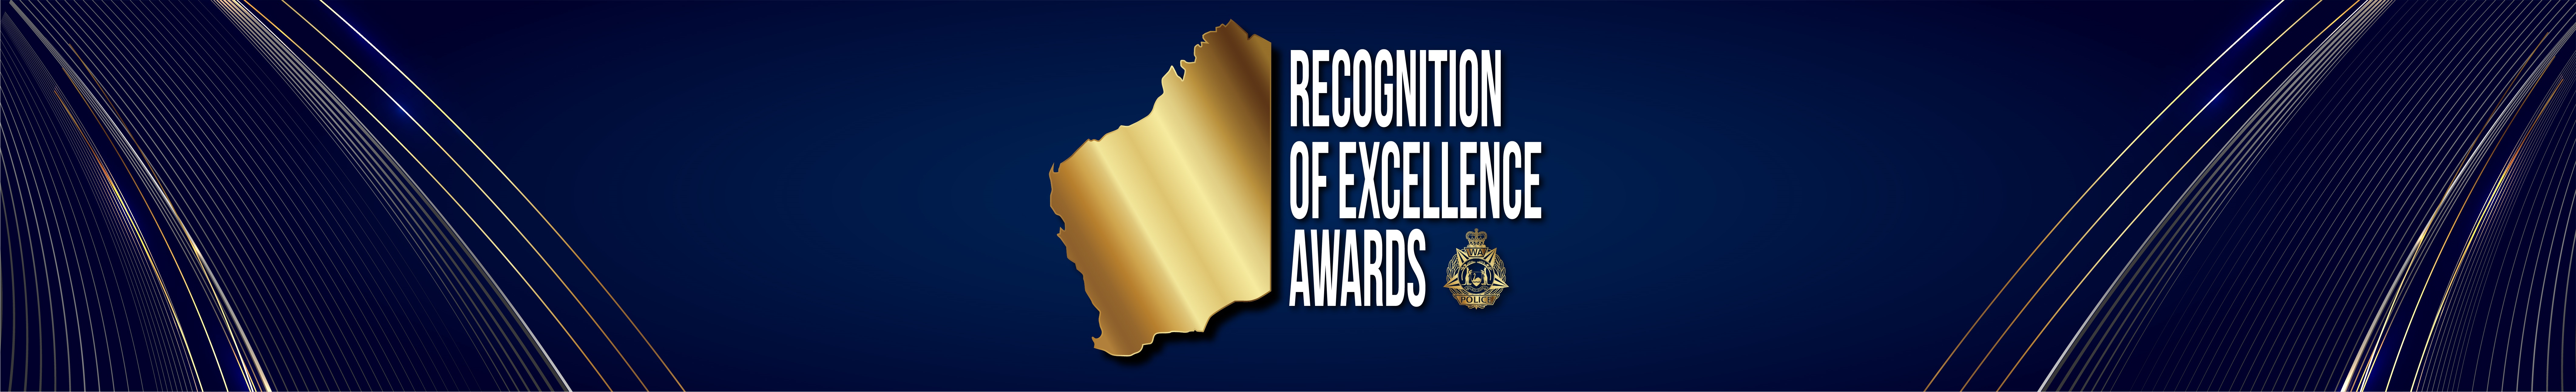 WA Police Force Recognition of Excellence Awards banner